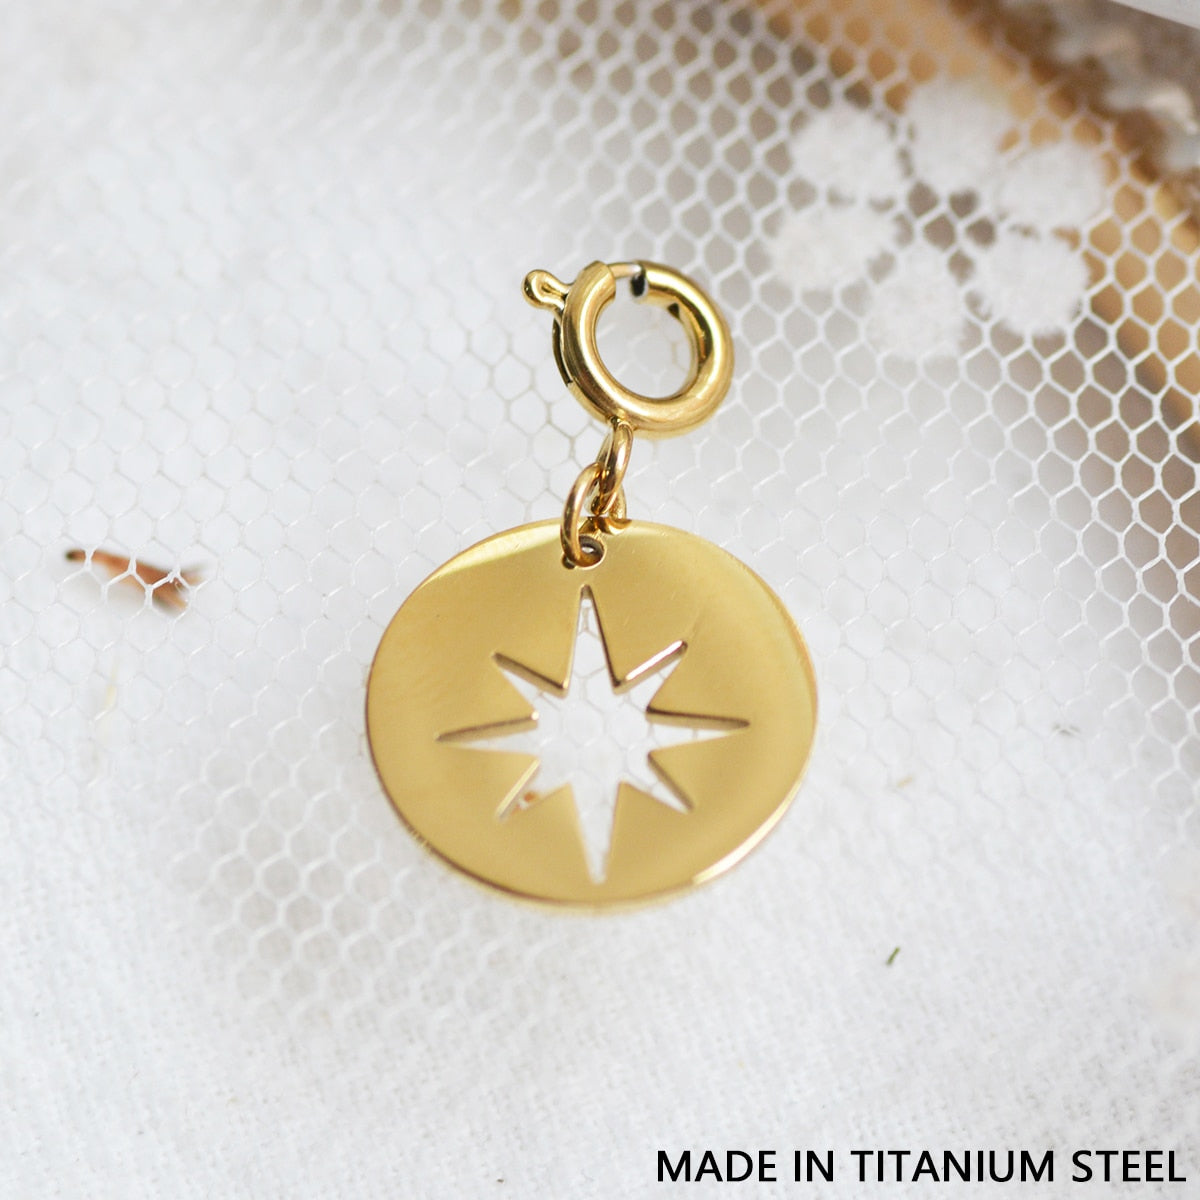 Star & Eye Natural Stone Charm Necklaces